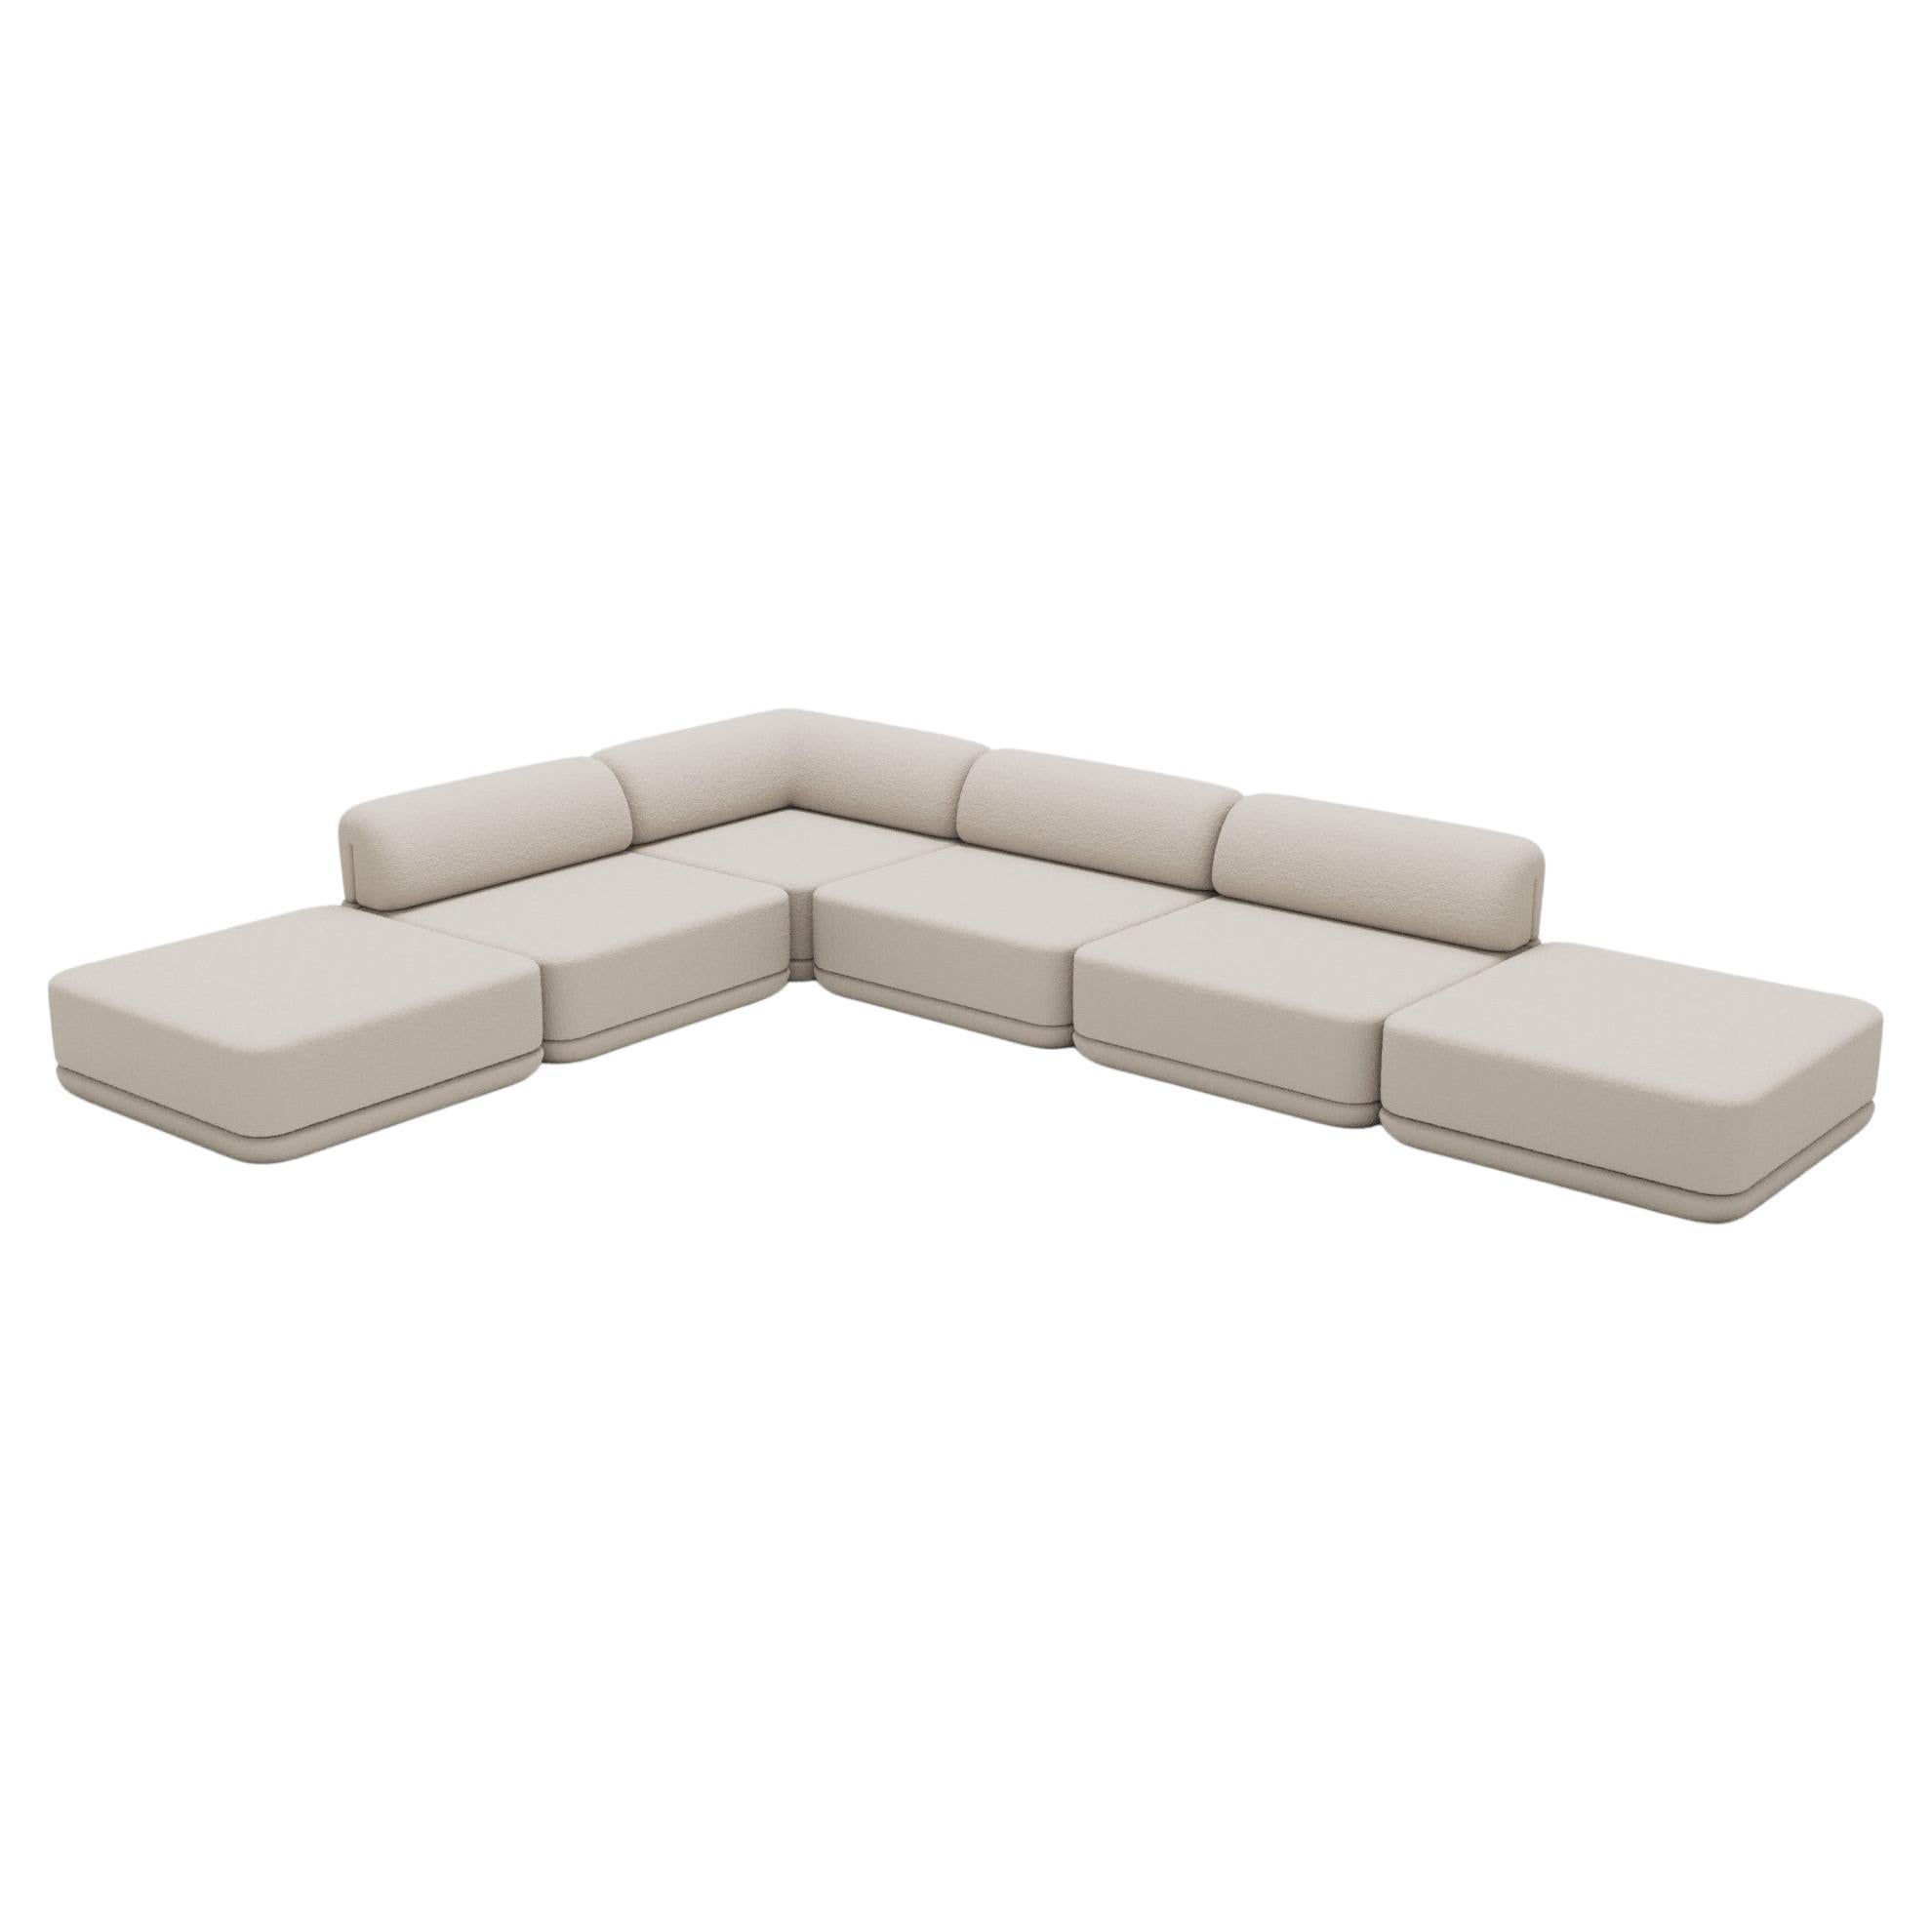 Corner Lounge Ottoman Mix Sectional - Inspired by 70s Italian Luxury Furniture

Discover The Cube Sofa, where art meets adaptability. Its sculptural design and customizable comfort create endless possibilities for your living space. Make a